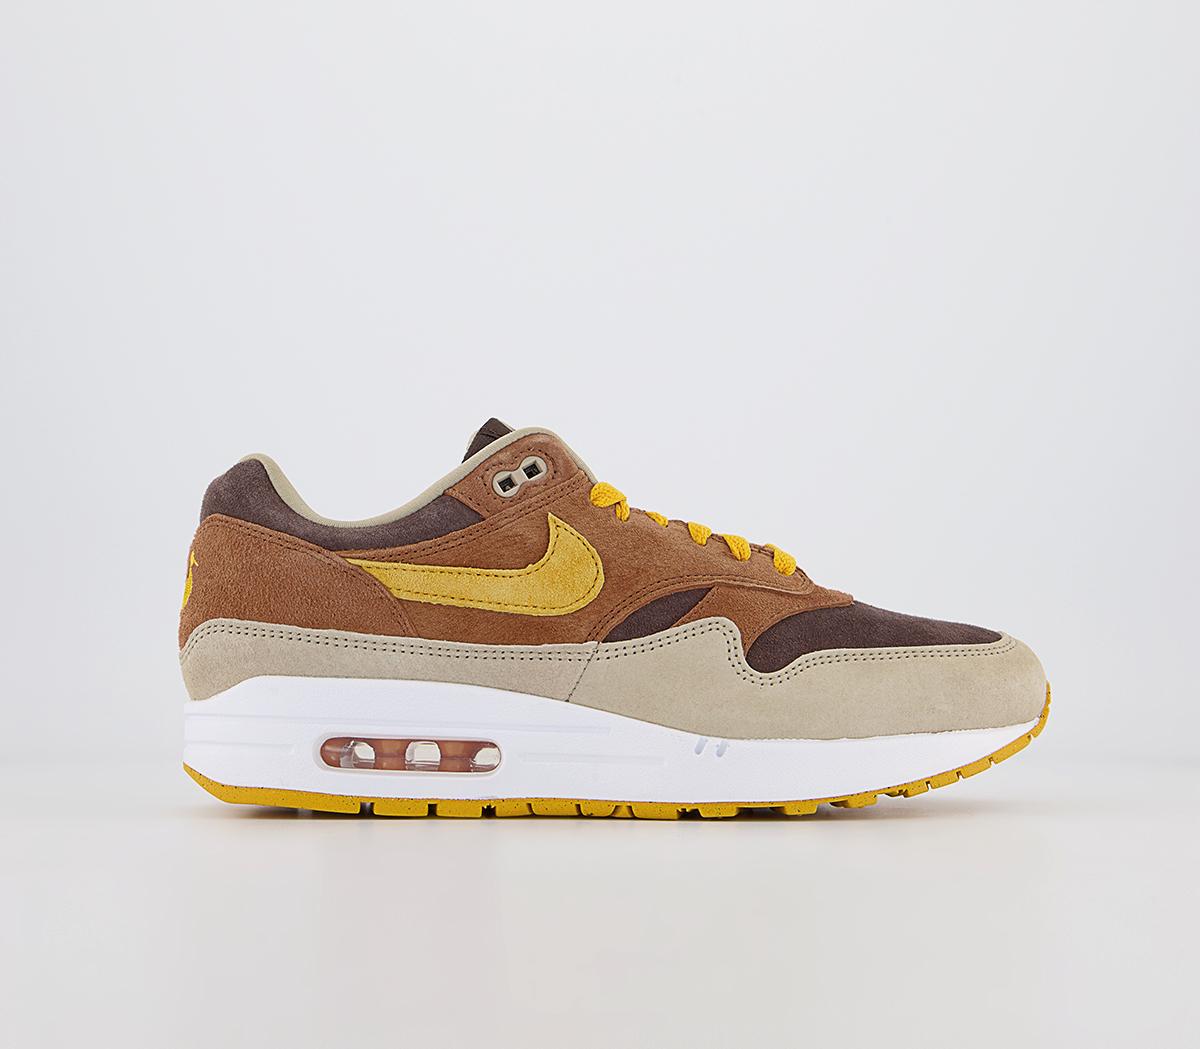 Nike Air Max 1 Trainers Pecan Yellow Ochre Baroque Brown - Women's Trainers